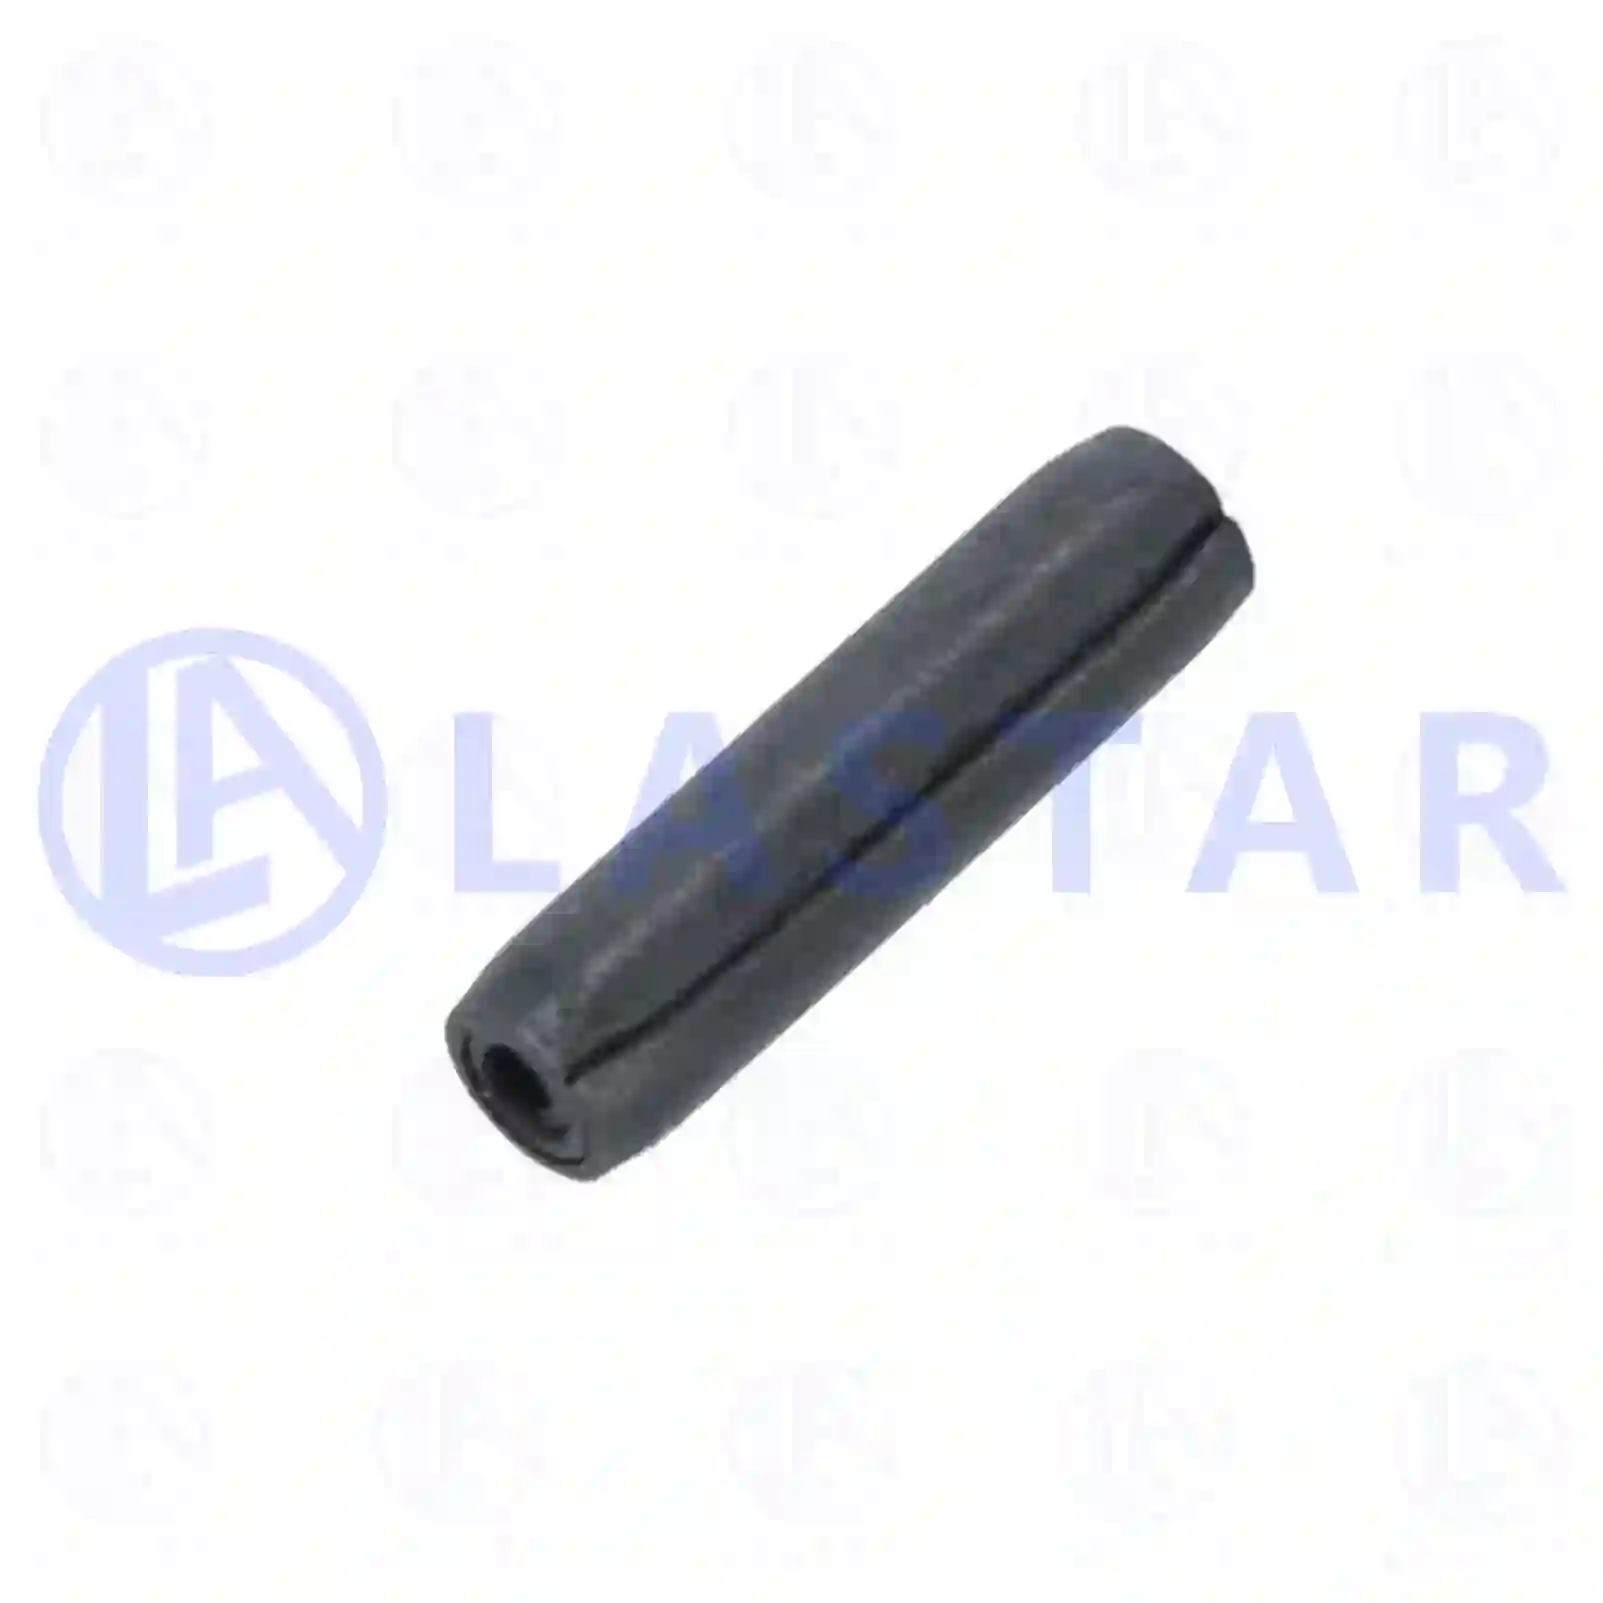  Spring pin || Lastar Spare Part | Truck Spare Parts, Auotomotive Spare Parts